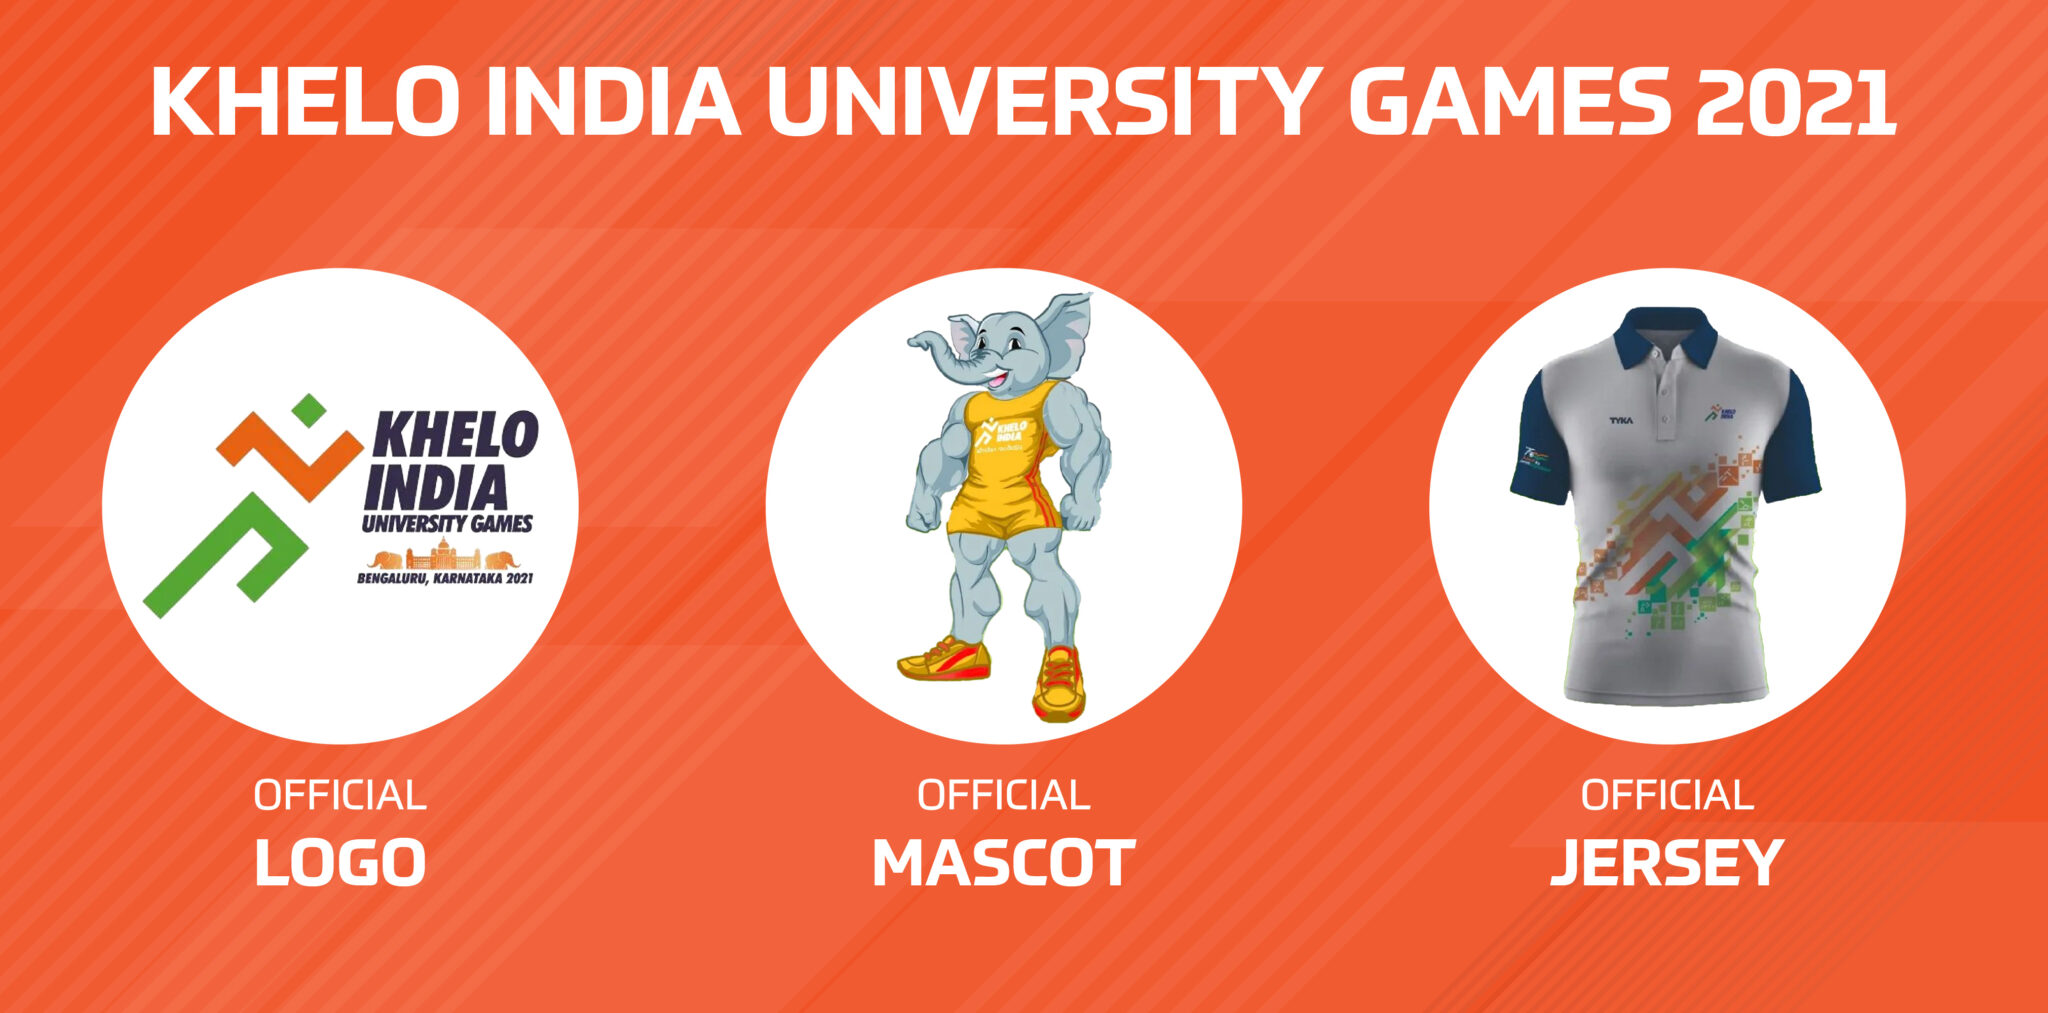 Khelo India University Games 2021: Venues, dates, and everything you need to know